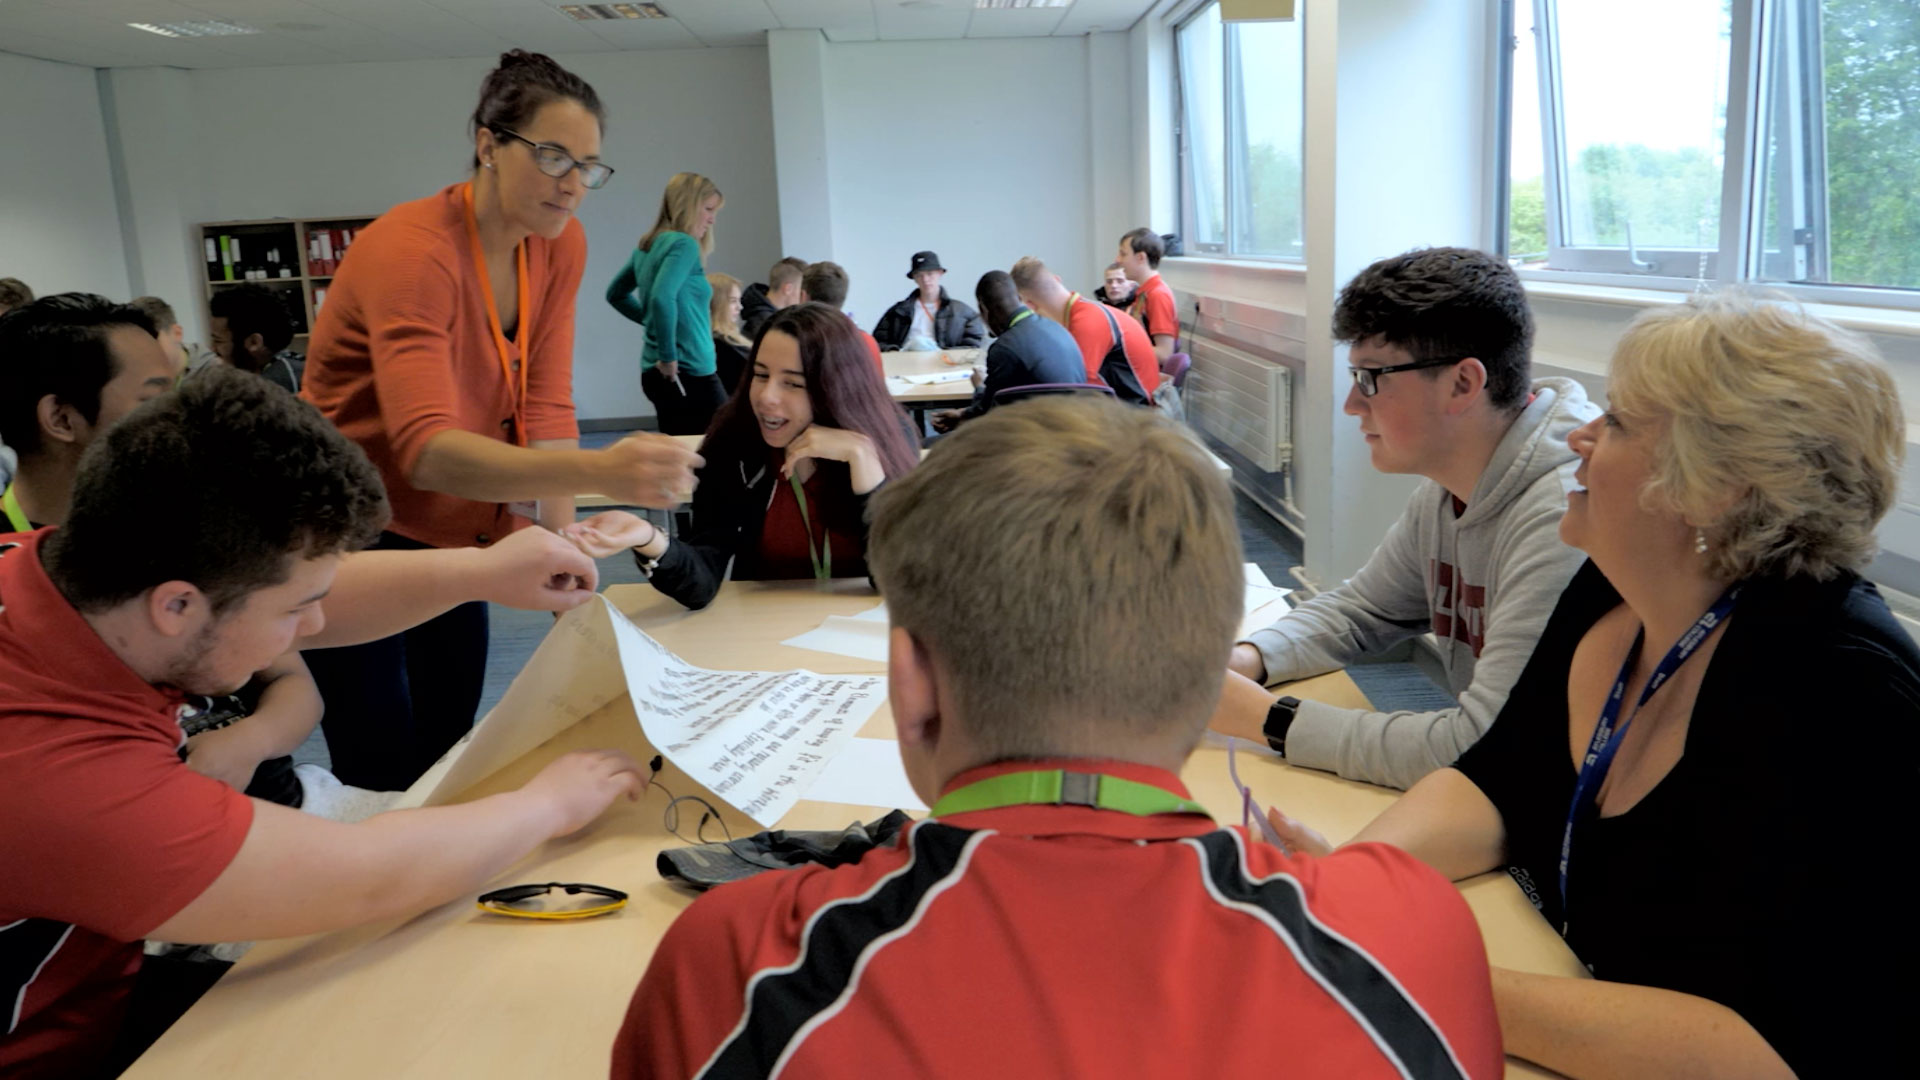 inspiration programme gives skills for a career in public services